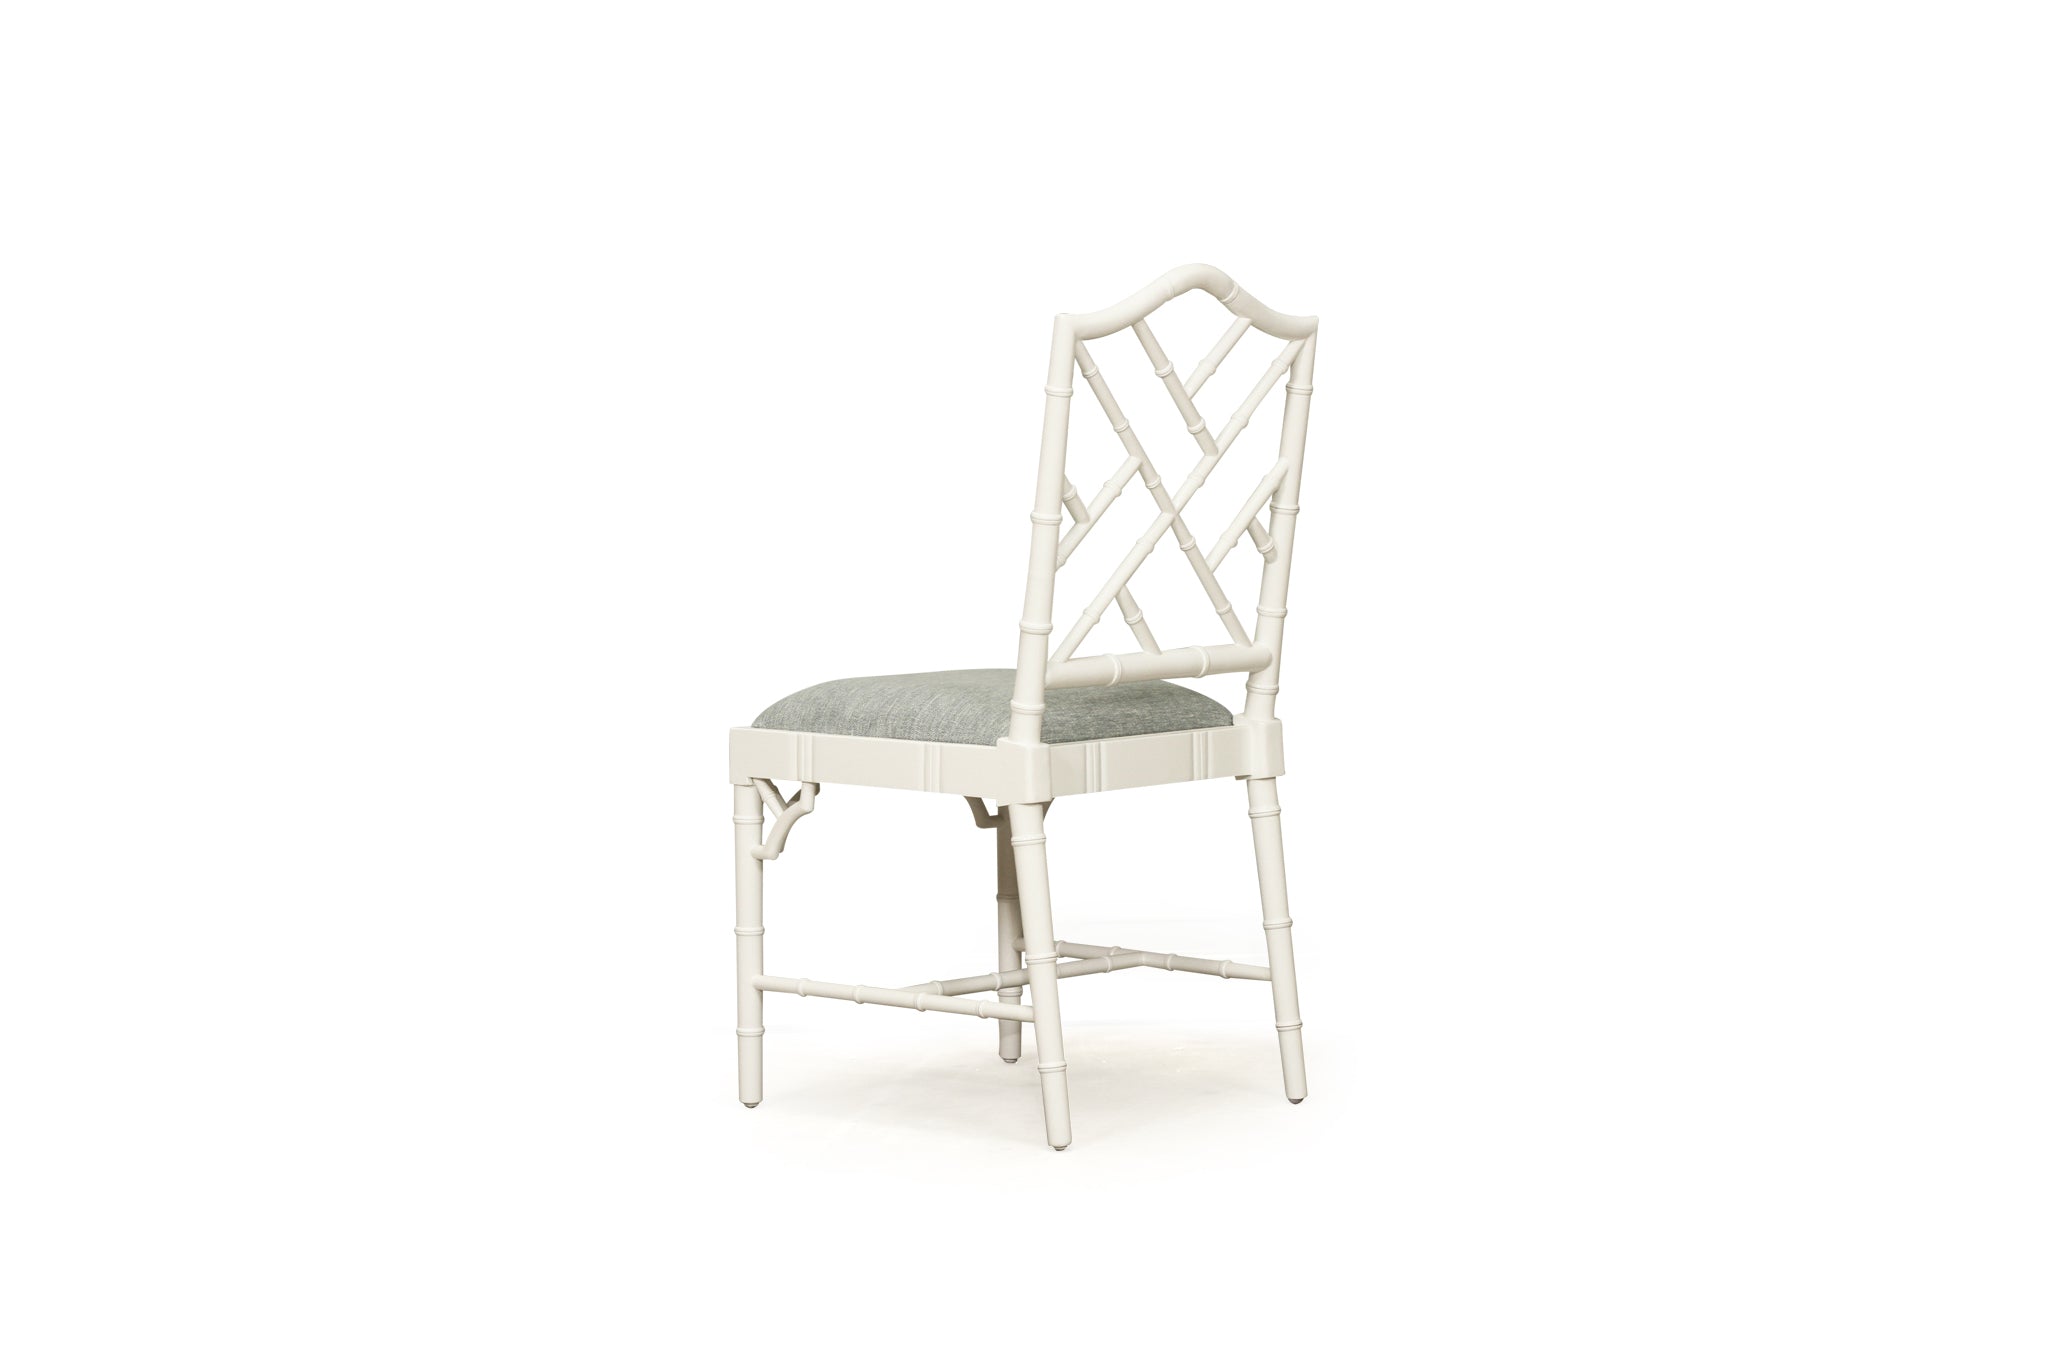 Thomas Mahogany Dining Chair – White with Duck Egg Fabric